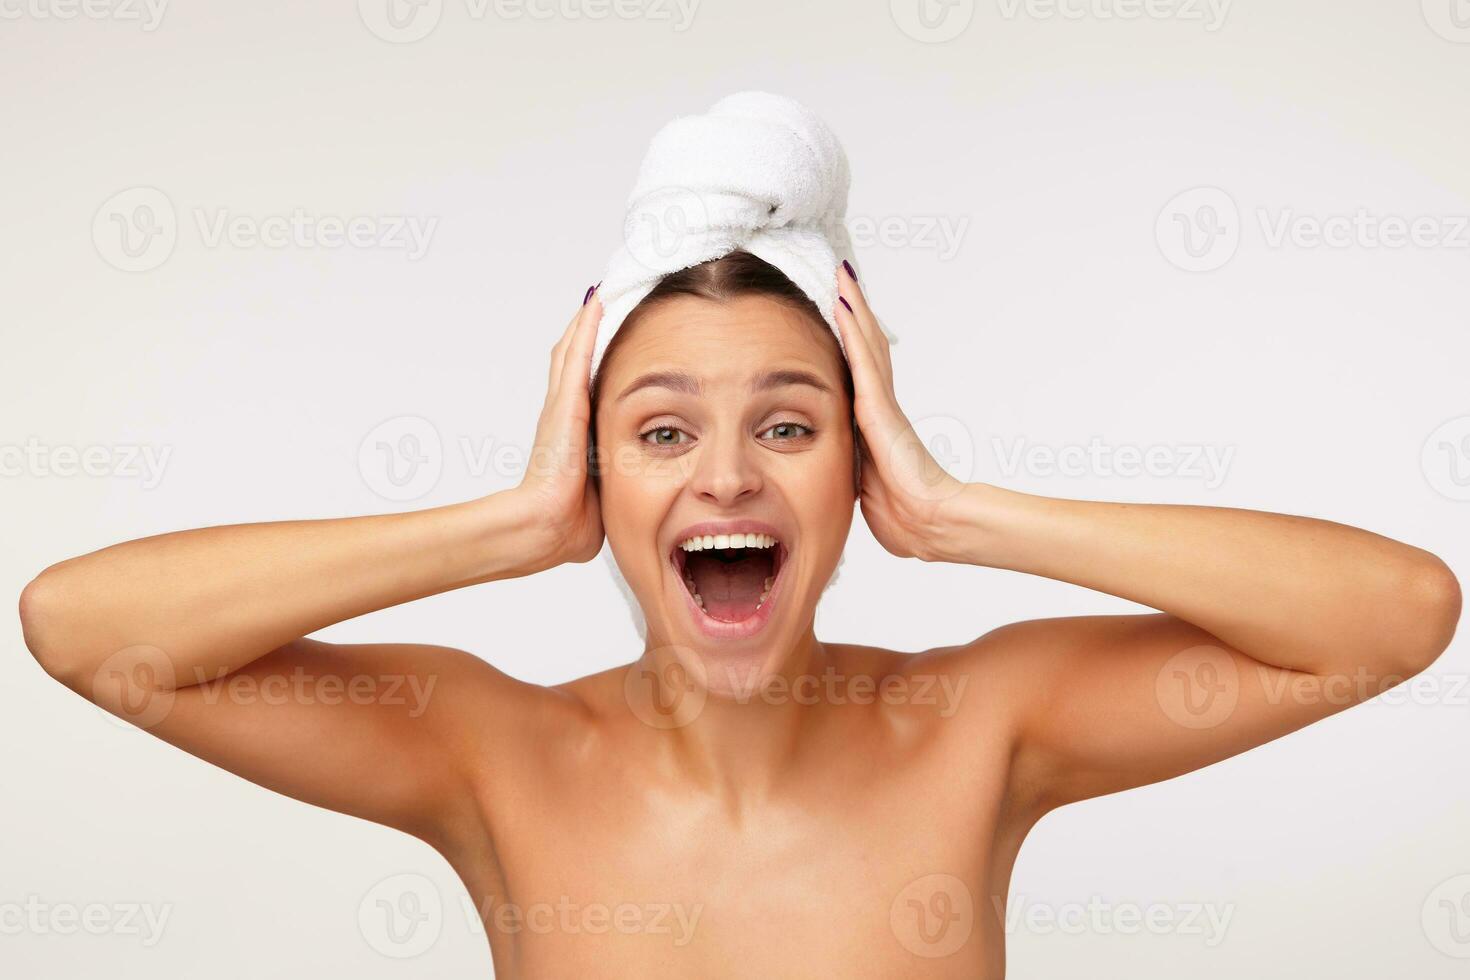 Excited young pretty lady with dark hair wrapped in bath towel clutching her head with raised hands and looking at camera with wide mouth opened, isolated over white background photo